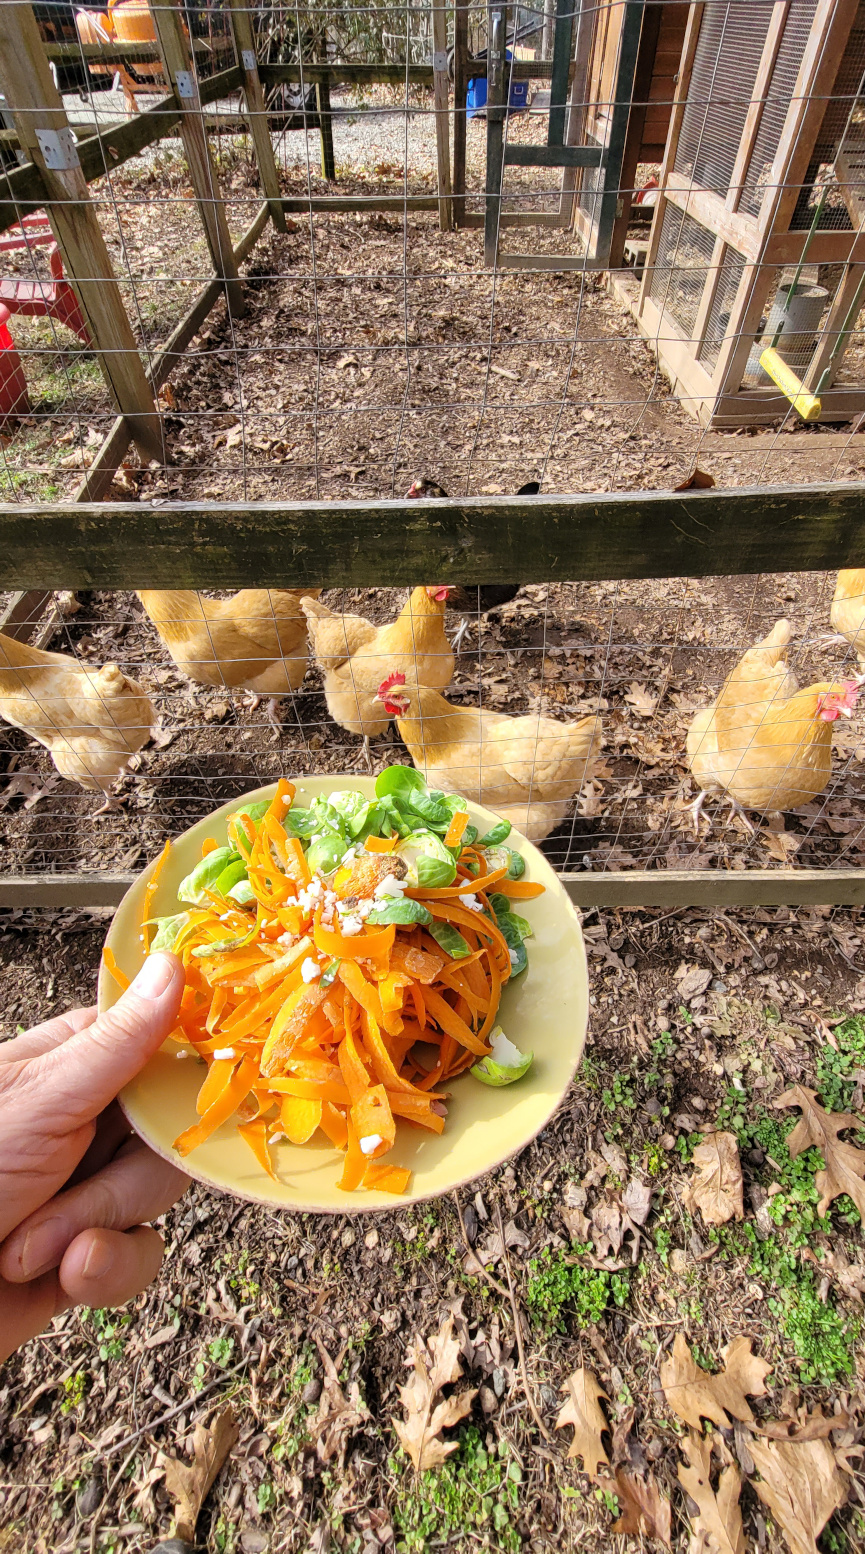 a plate of vegetable scrapings for the chickens